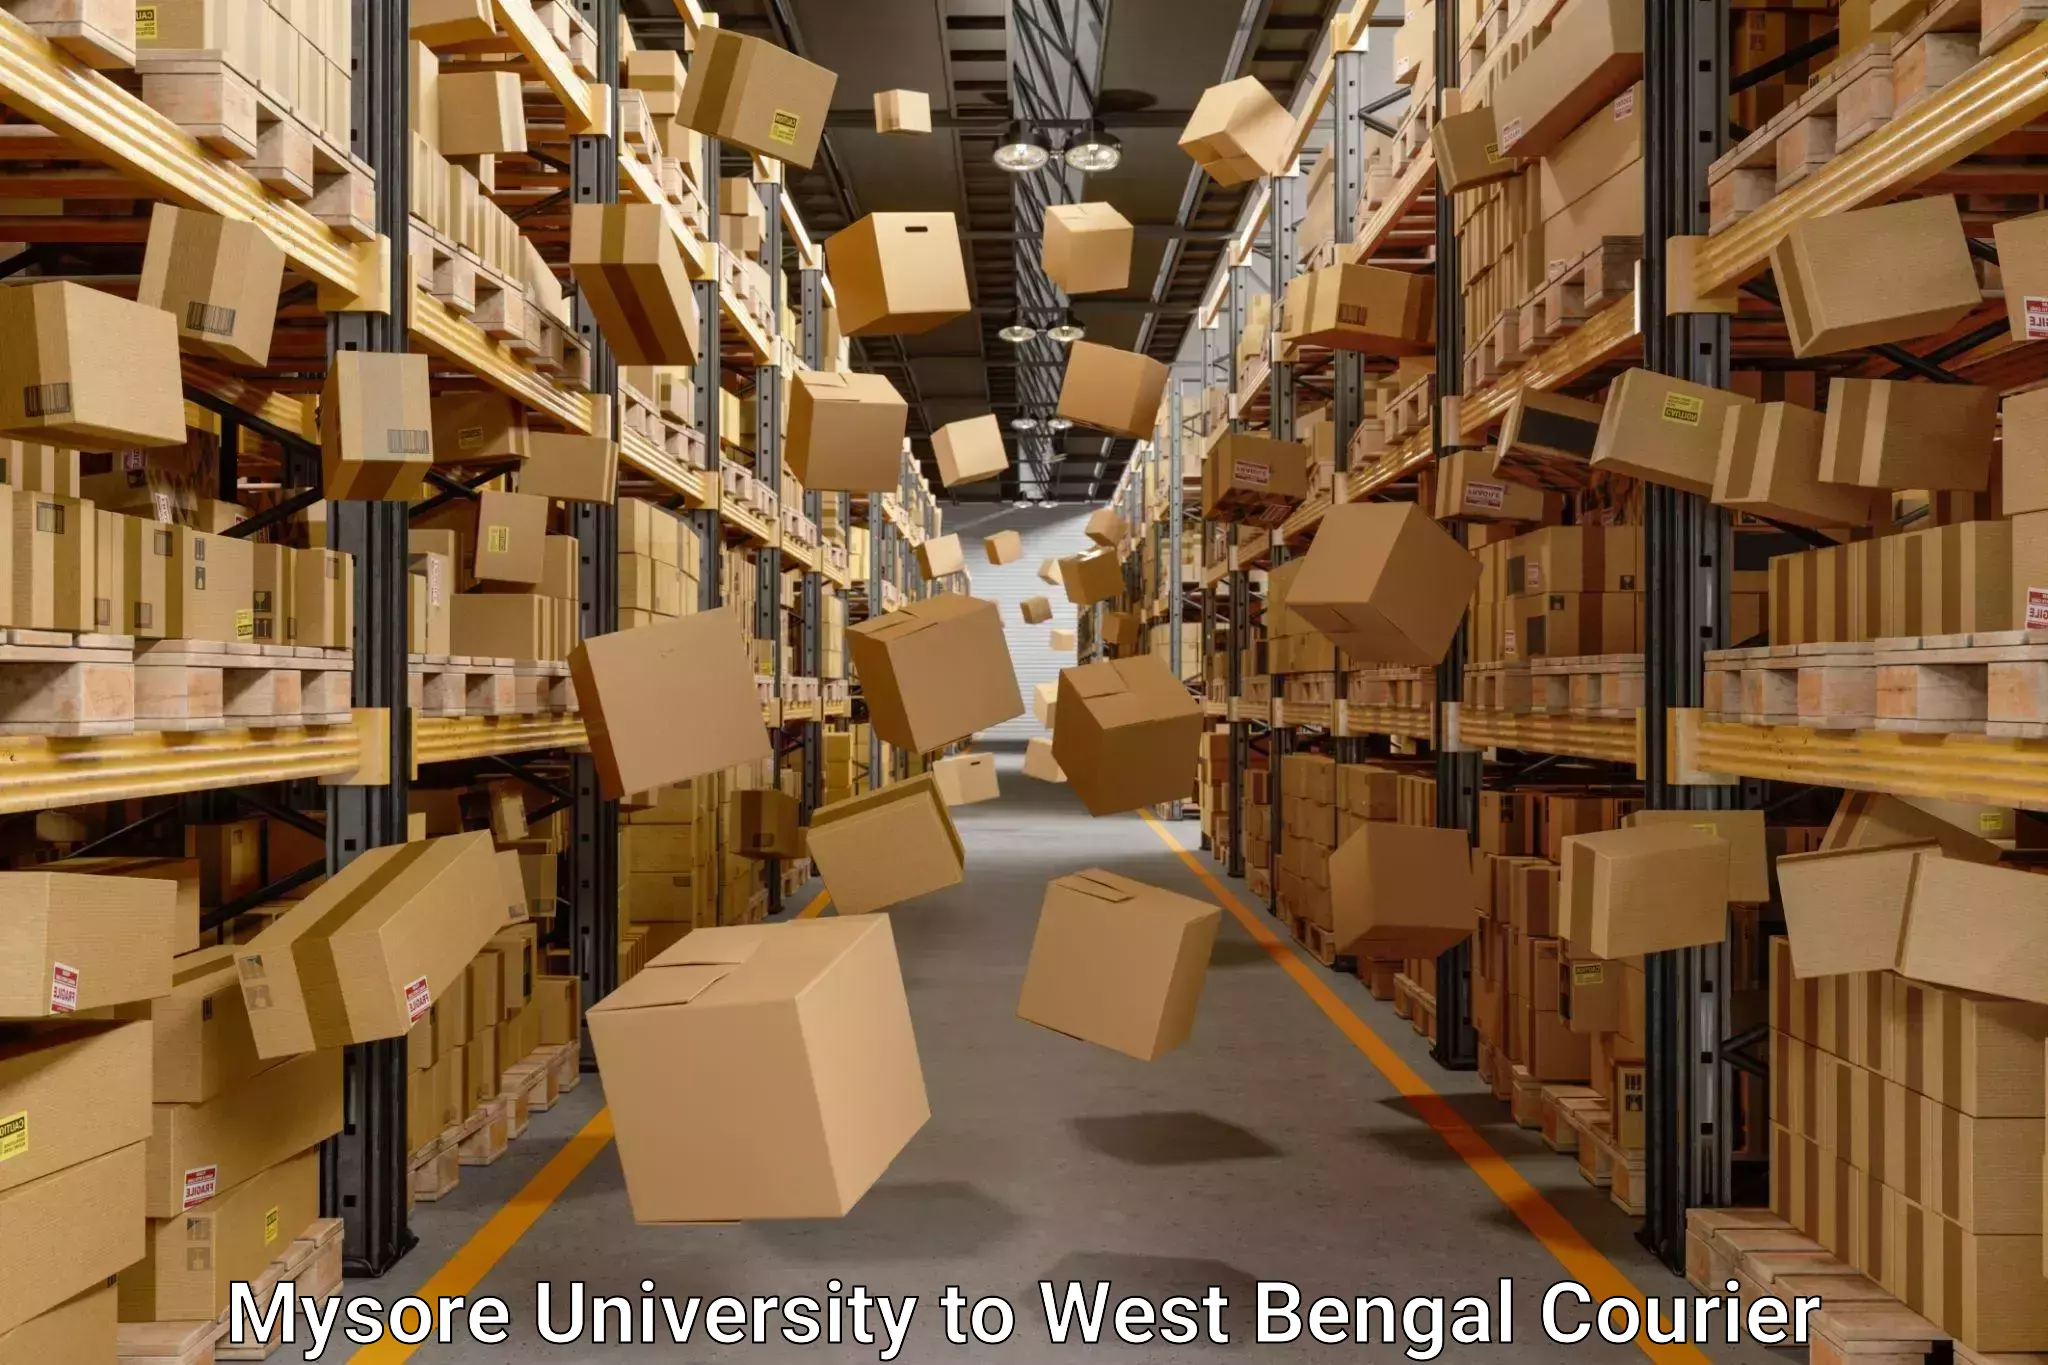 Expert moving and storage Mysore University to West Bengal